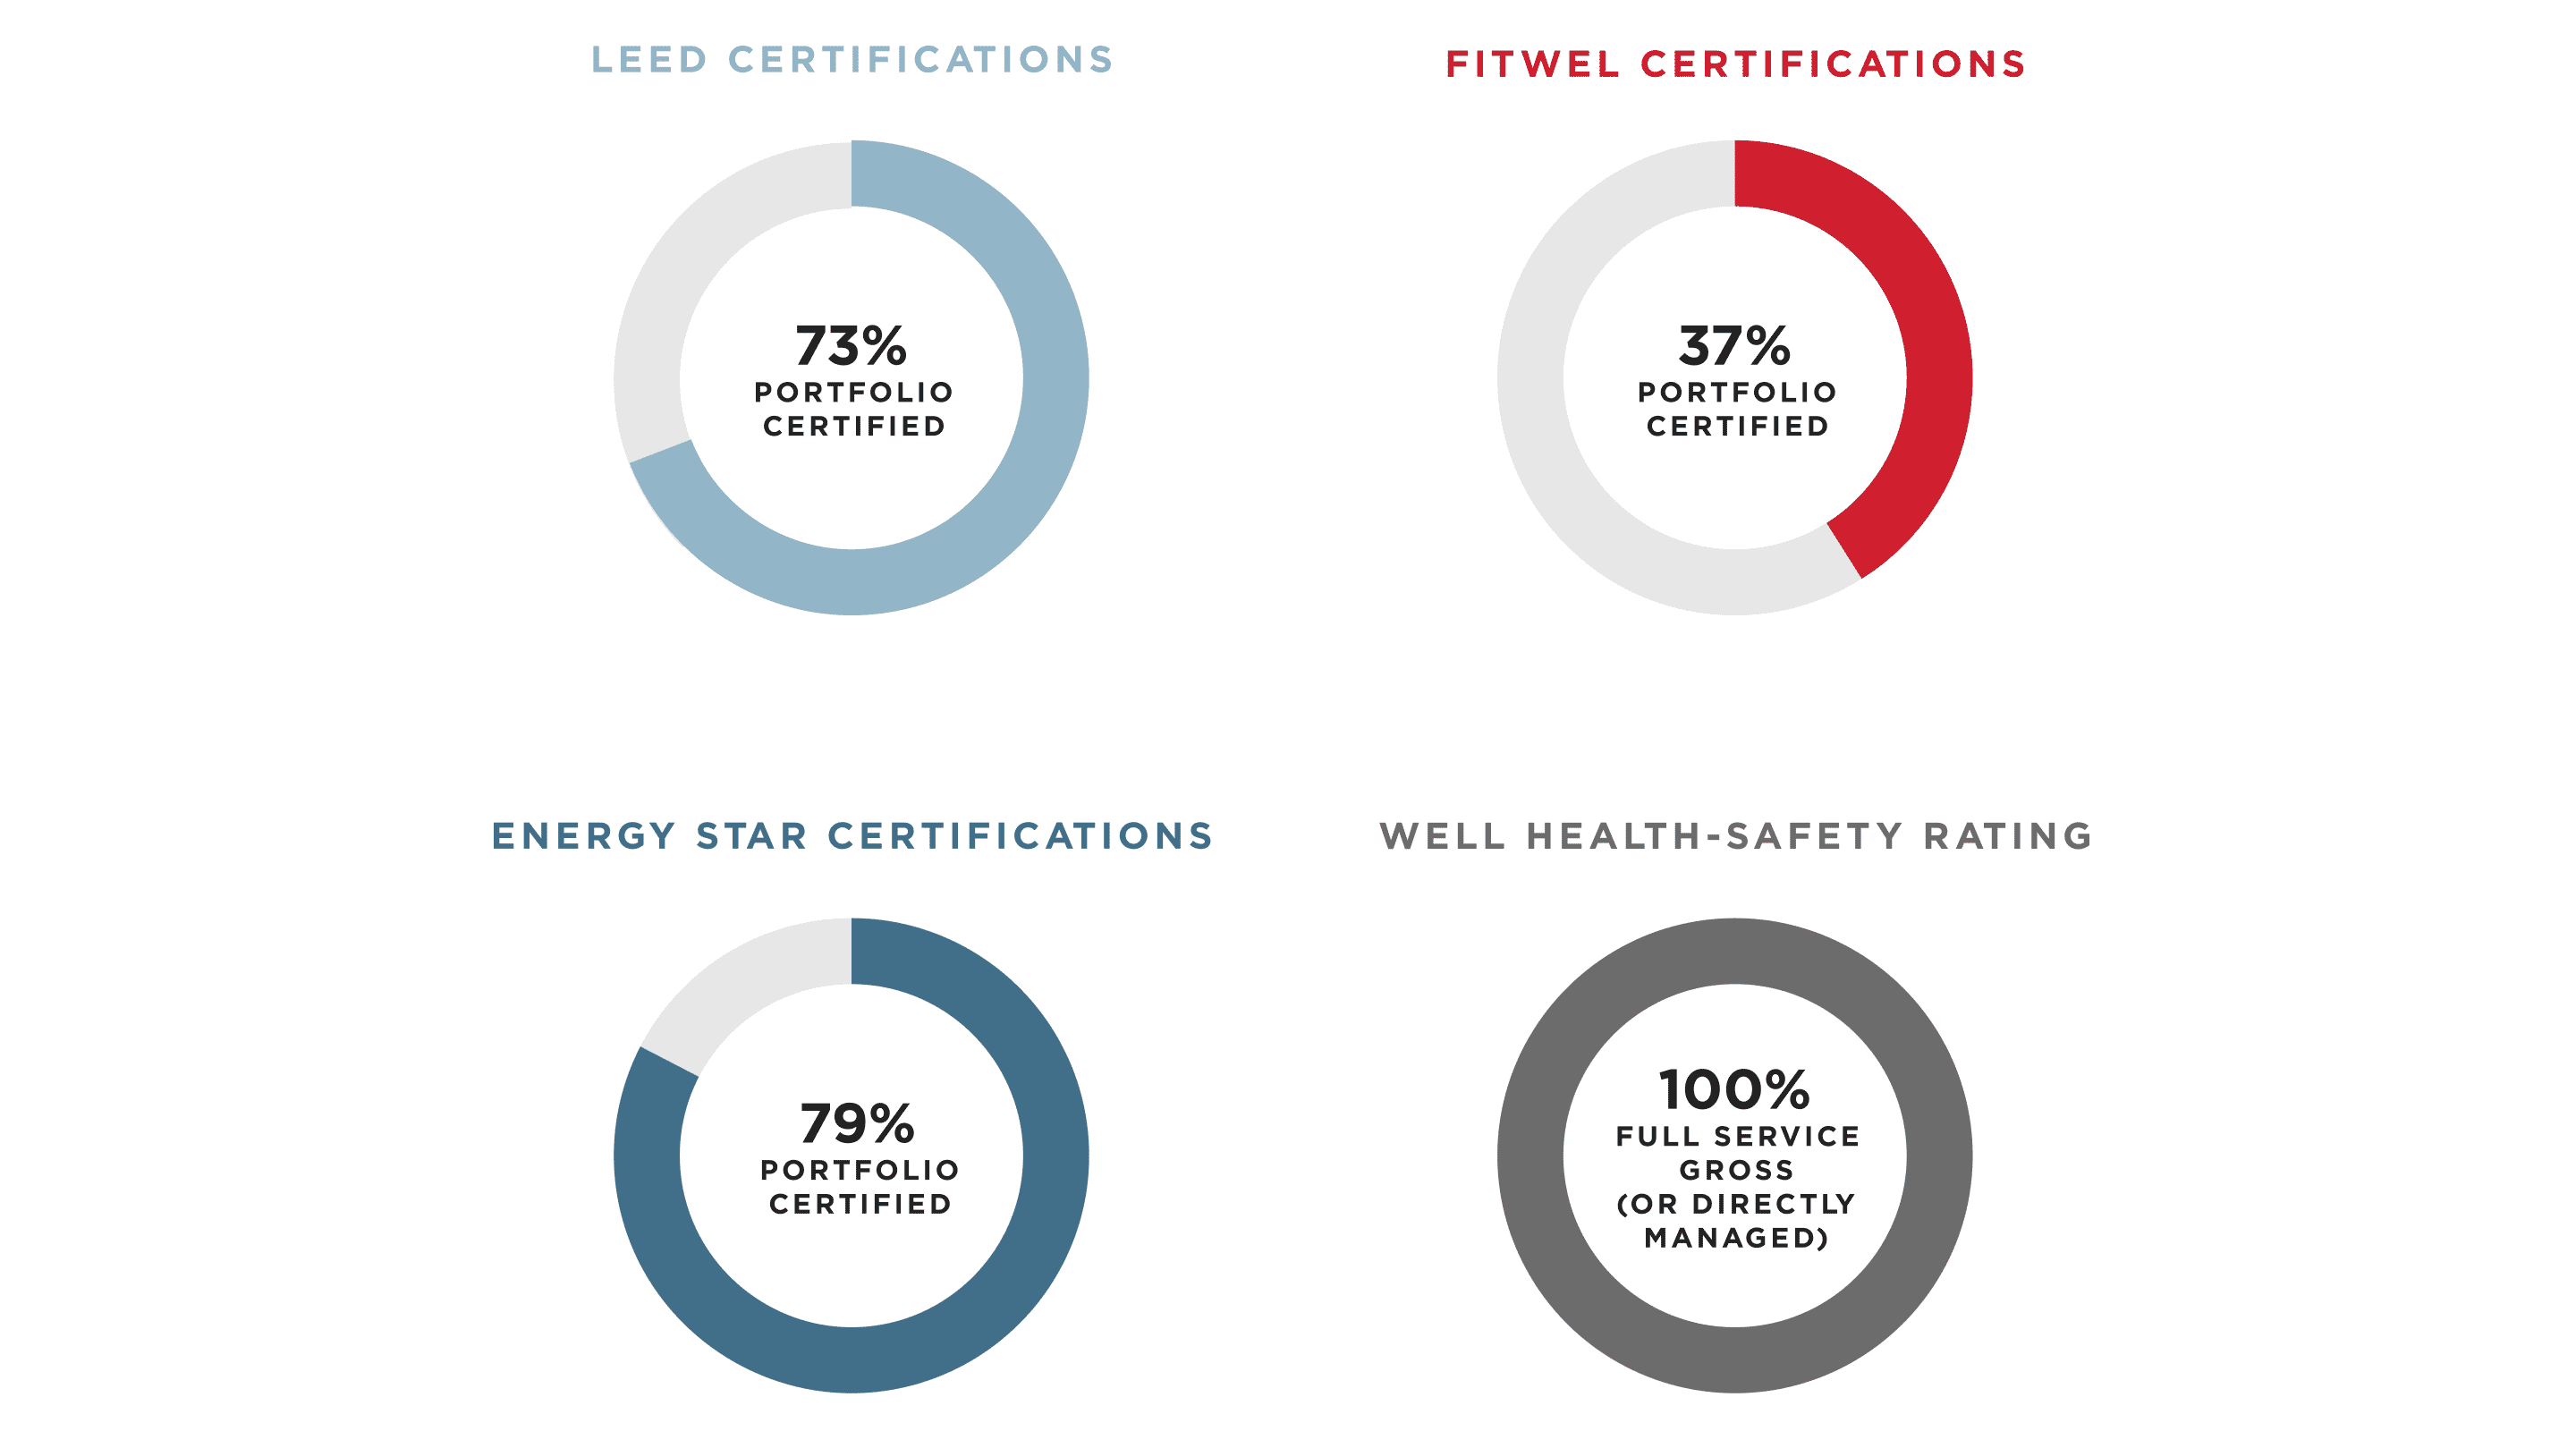 2021 Key Building Certifications Graphic—LEED, Fitwel, Energy Star, Well Health-Safety Rating